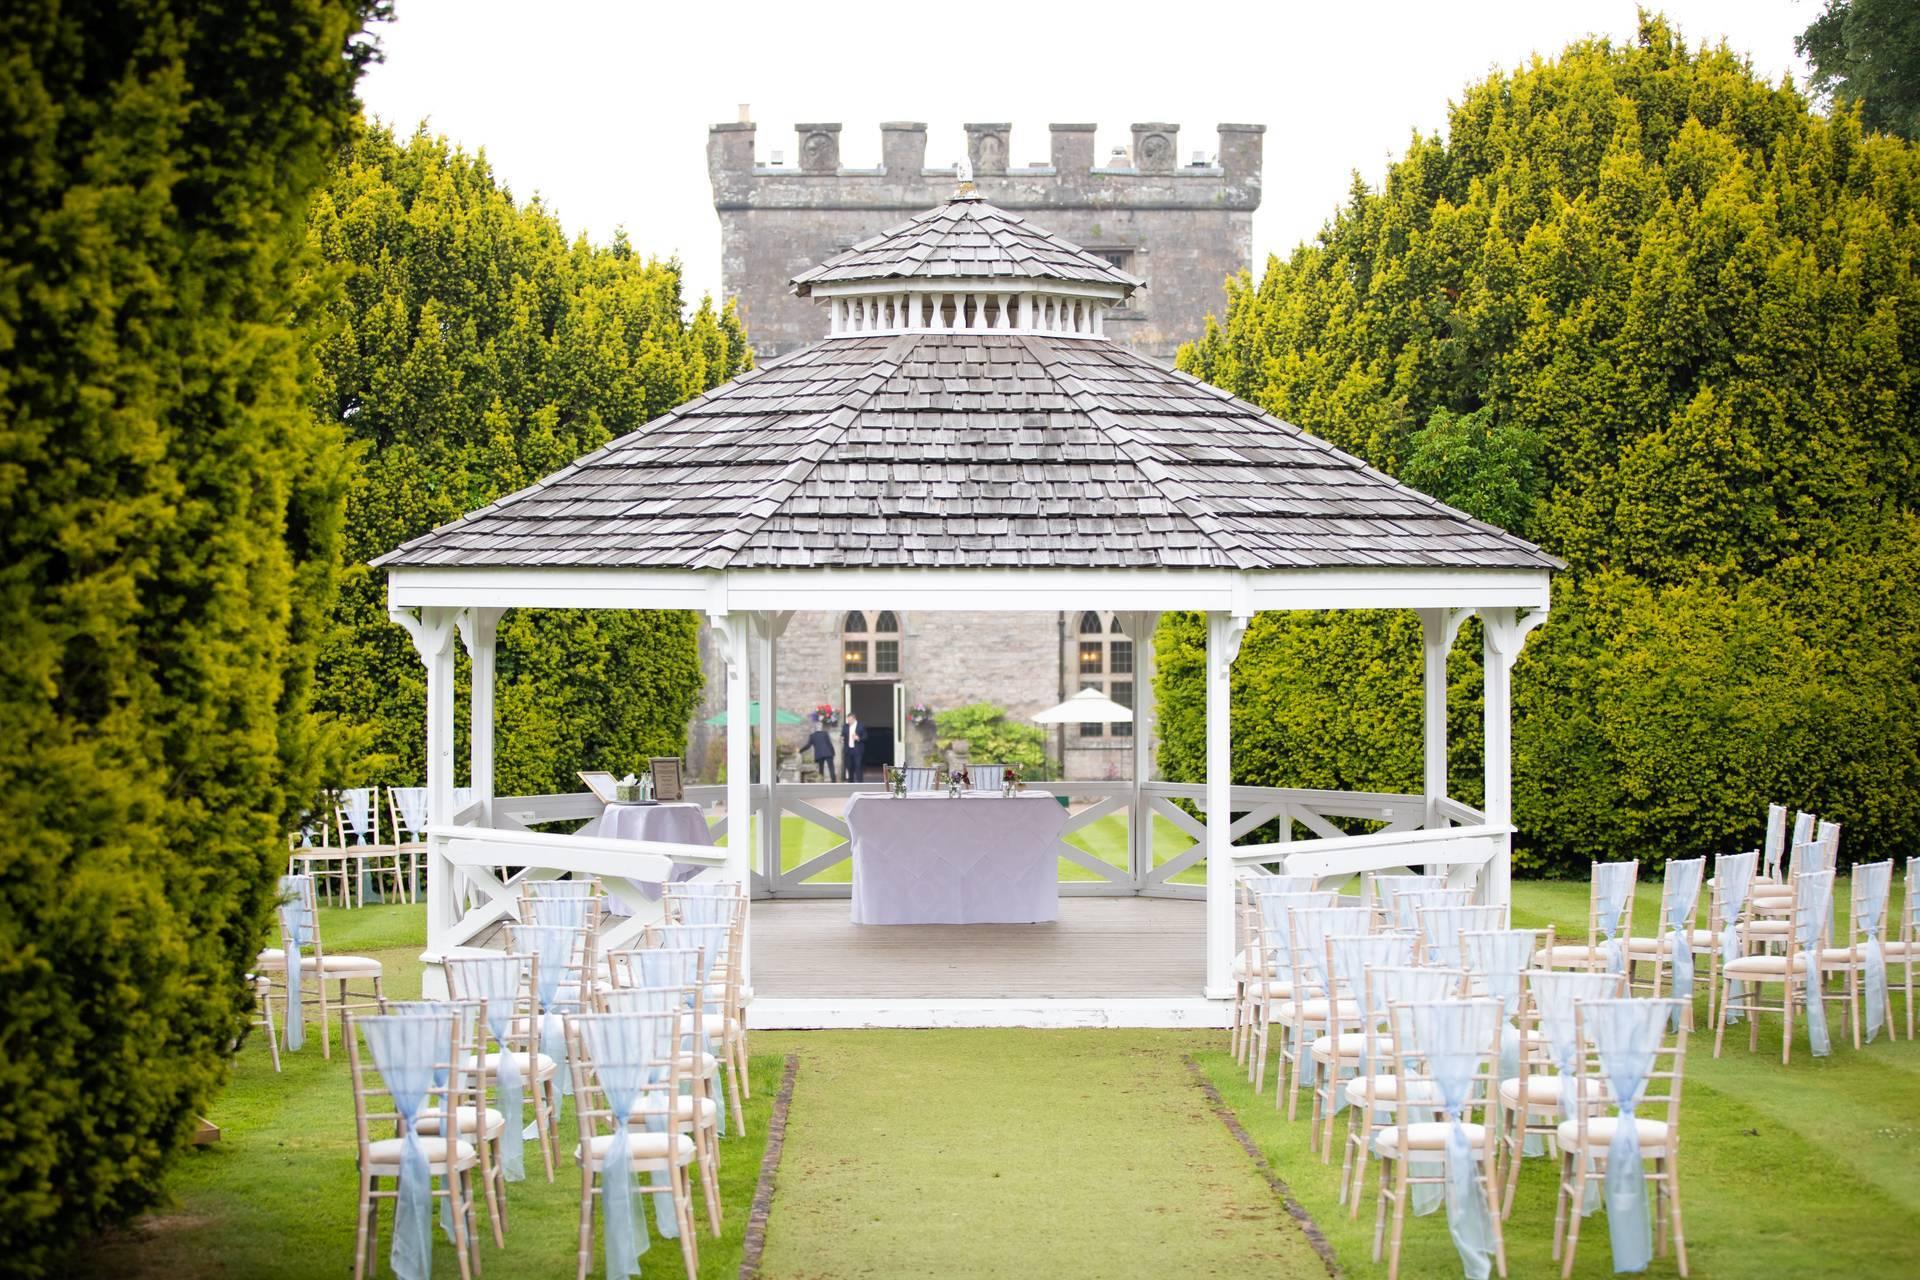 Clearwell Castle, The Bandstand photo #1